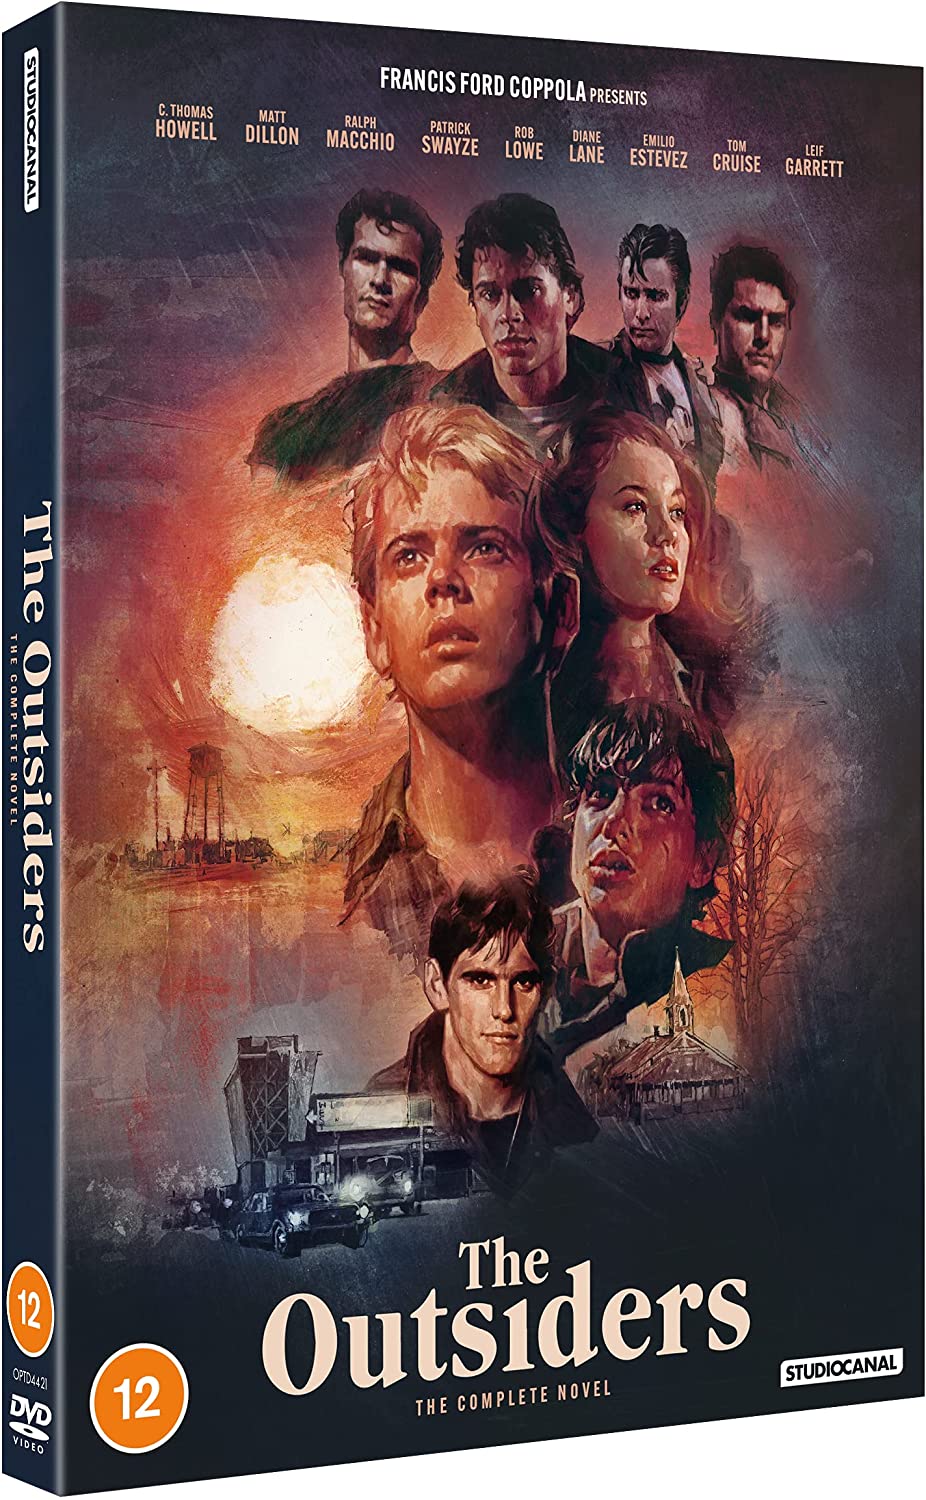 The Outsiders The Complete Novel (2021 restoration) [DVD]